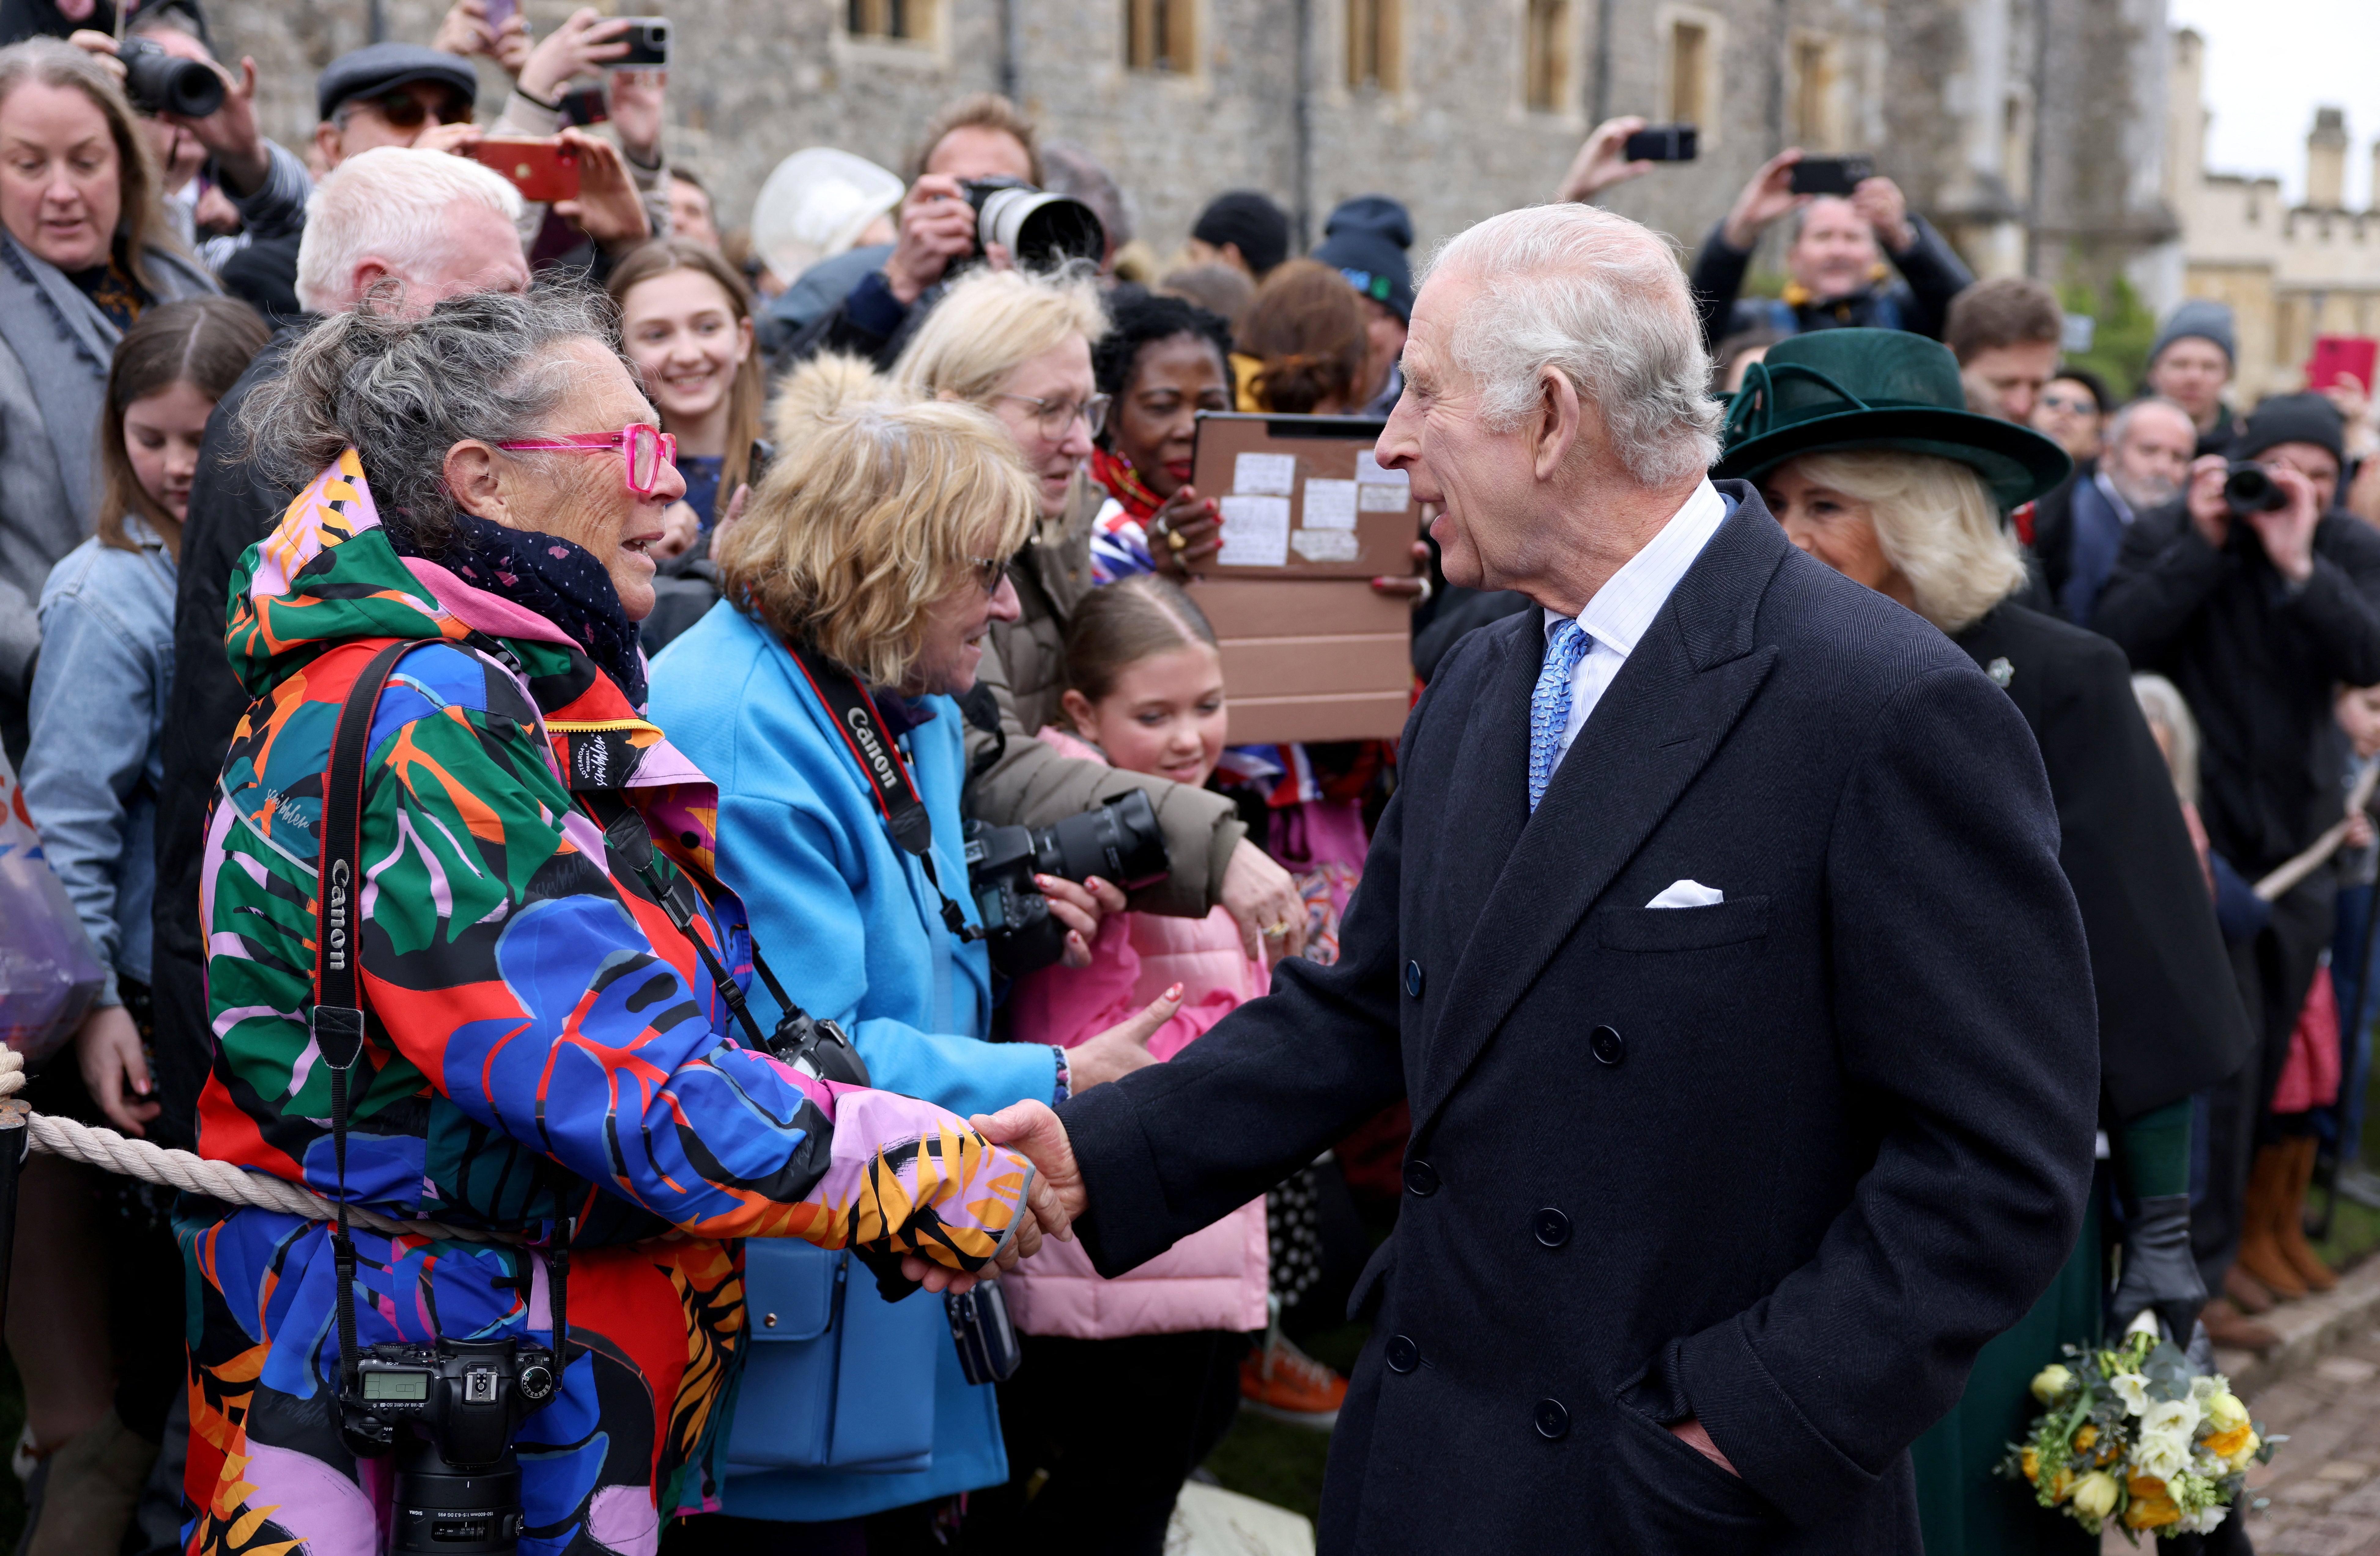 People who greeted the King said he “looked well” and was in “good spirits”